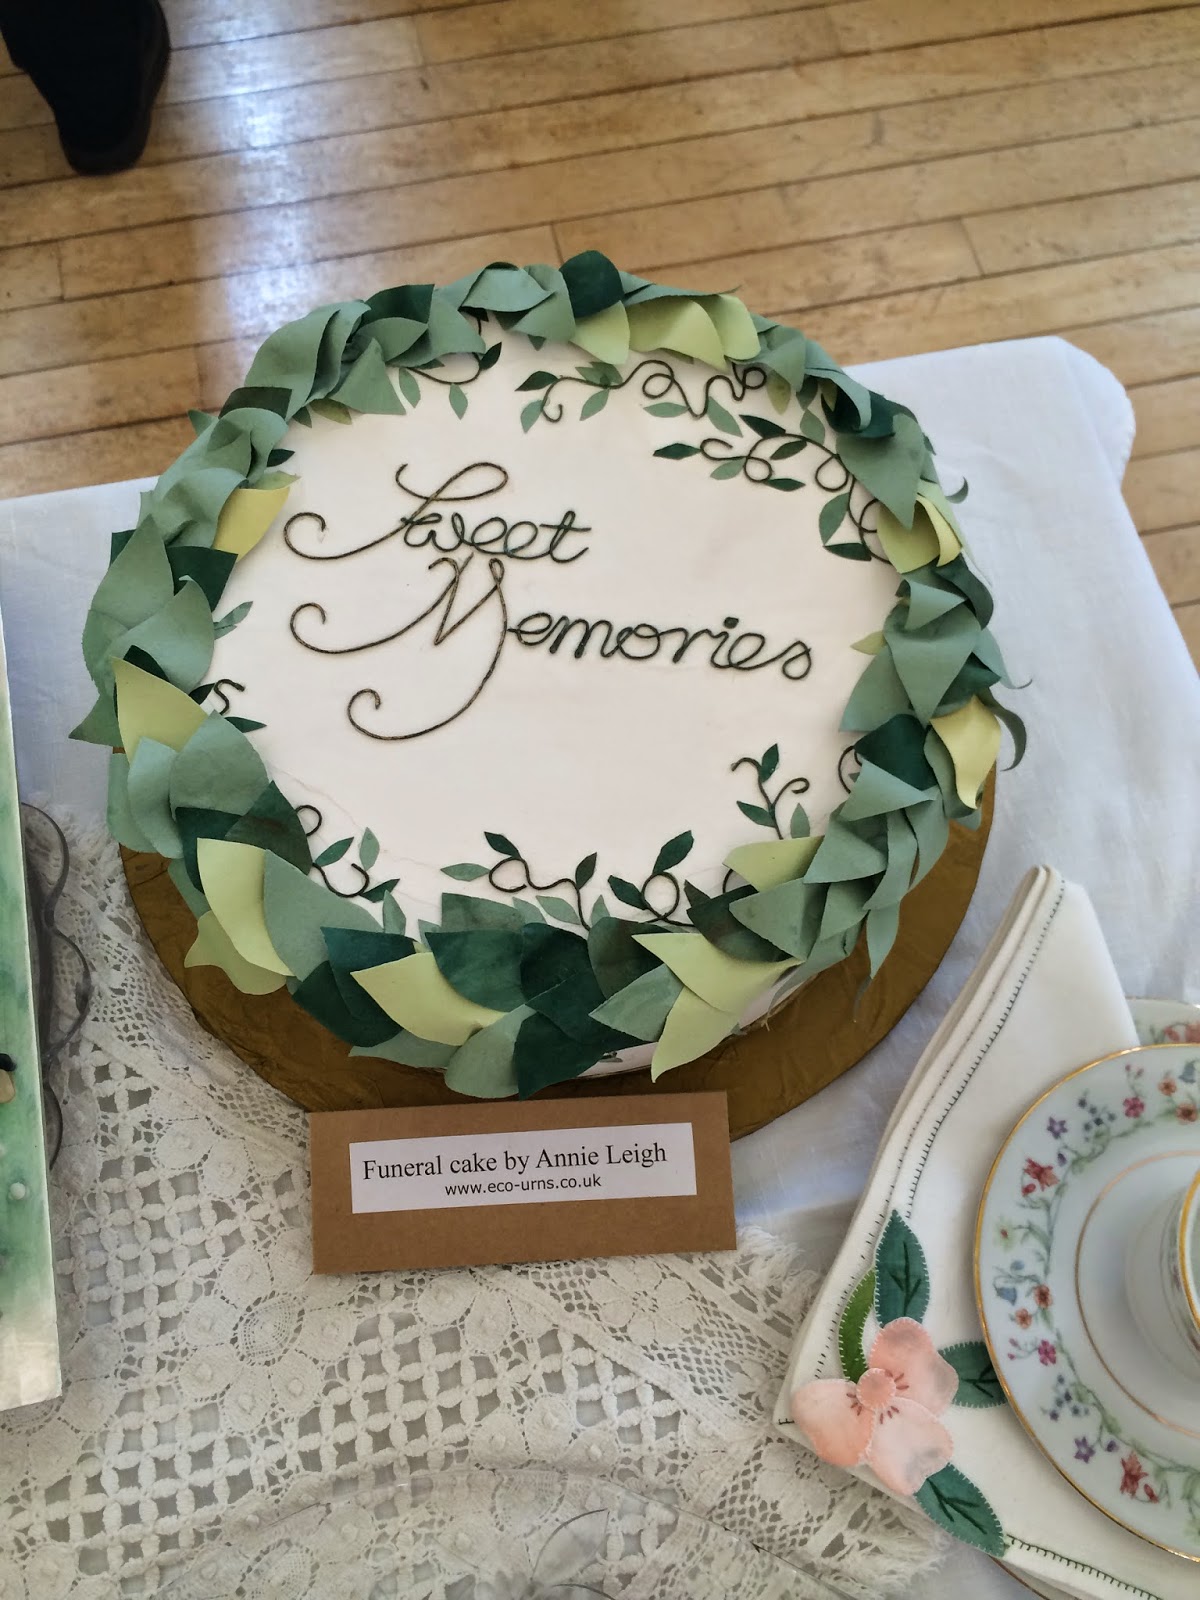 10 Best Cakes For Funerals Photo - Funeral Cake, Funeral Memorial